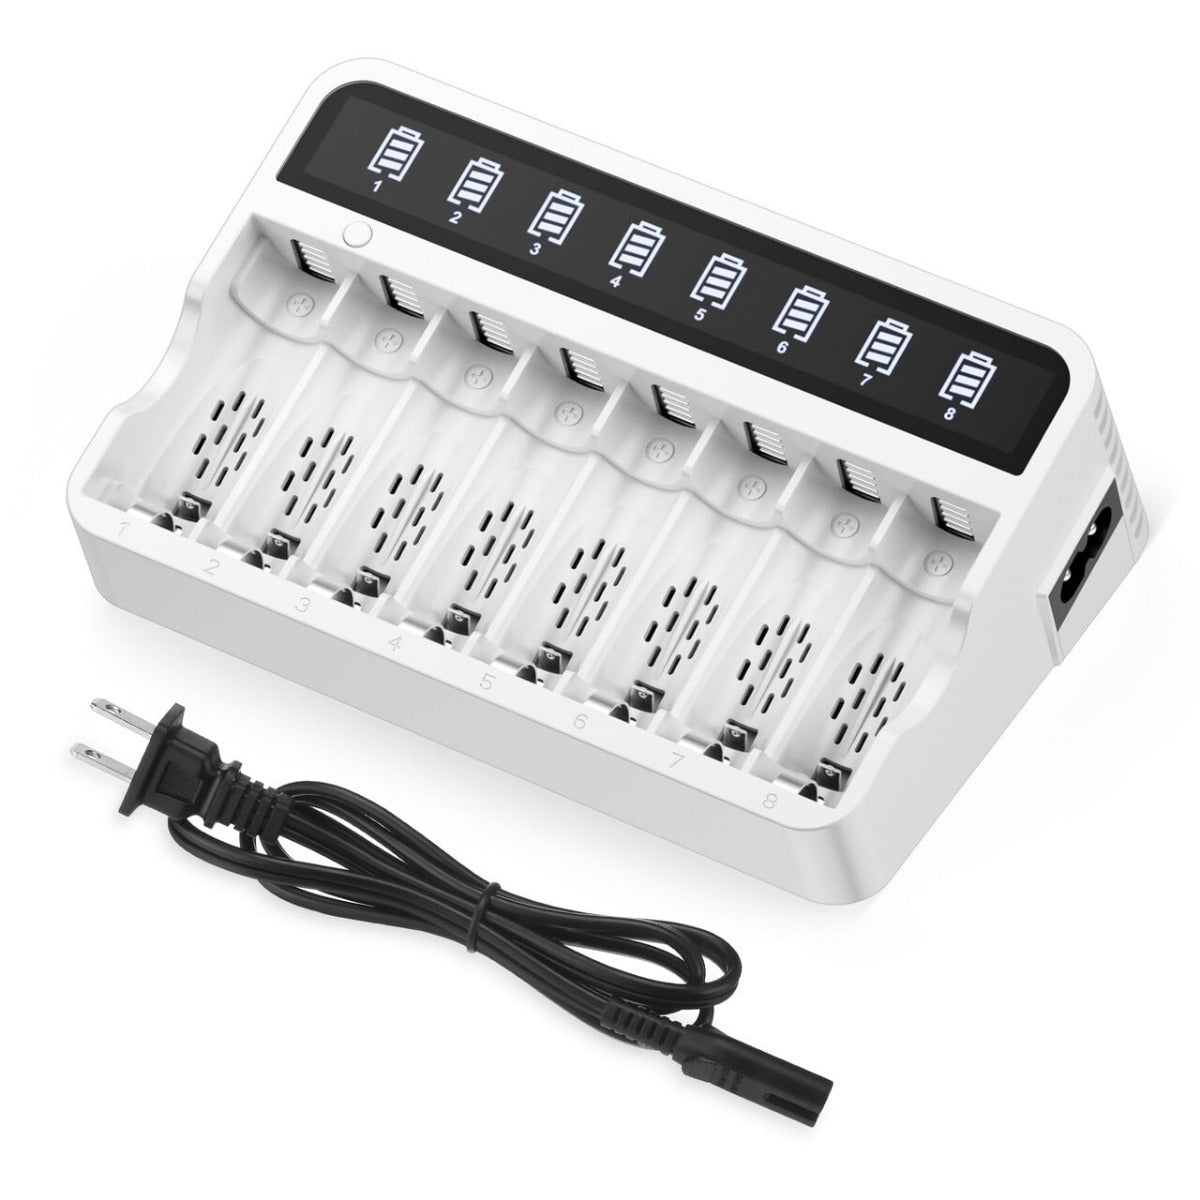 Shop EBL AA AAA Batteries with FY-809 8-Bay LCD Battery Charger –  EBLOfficial